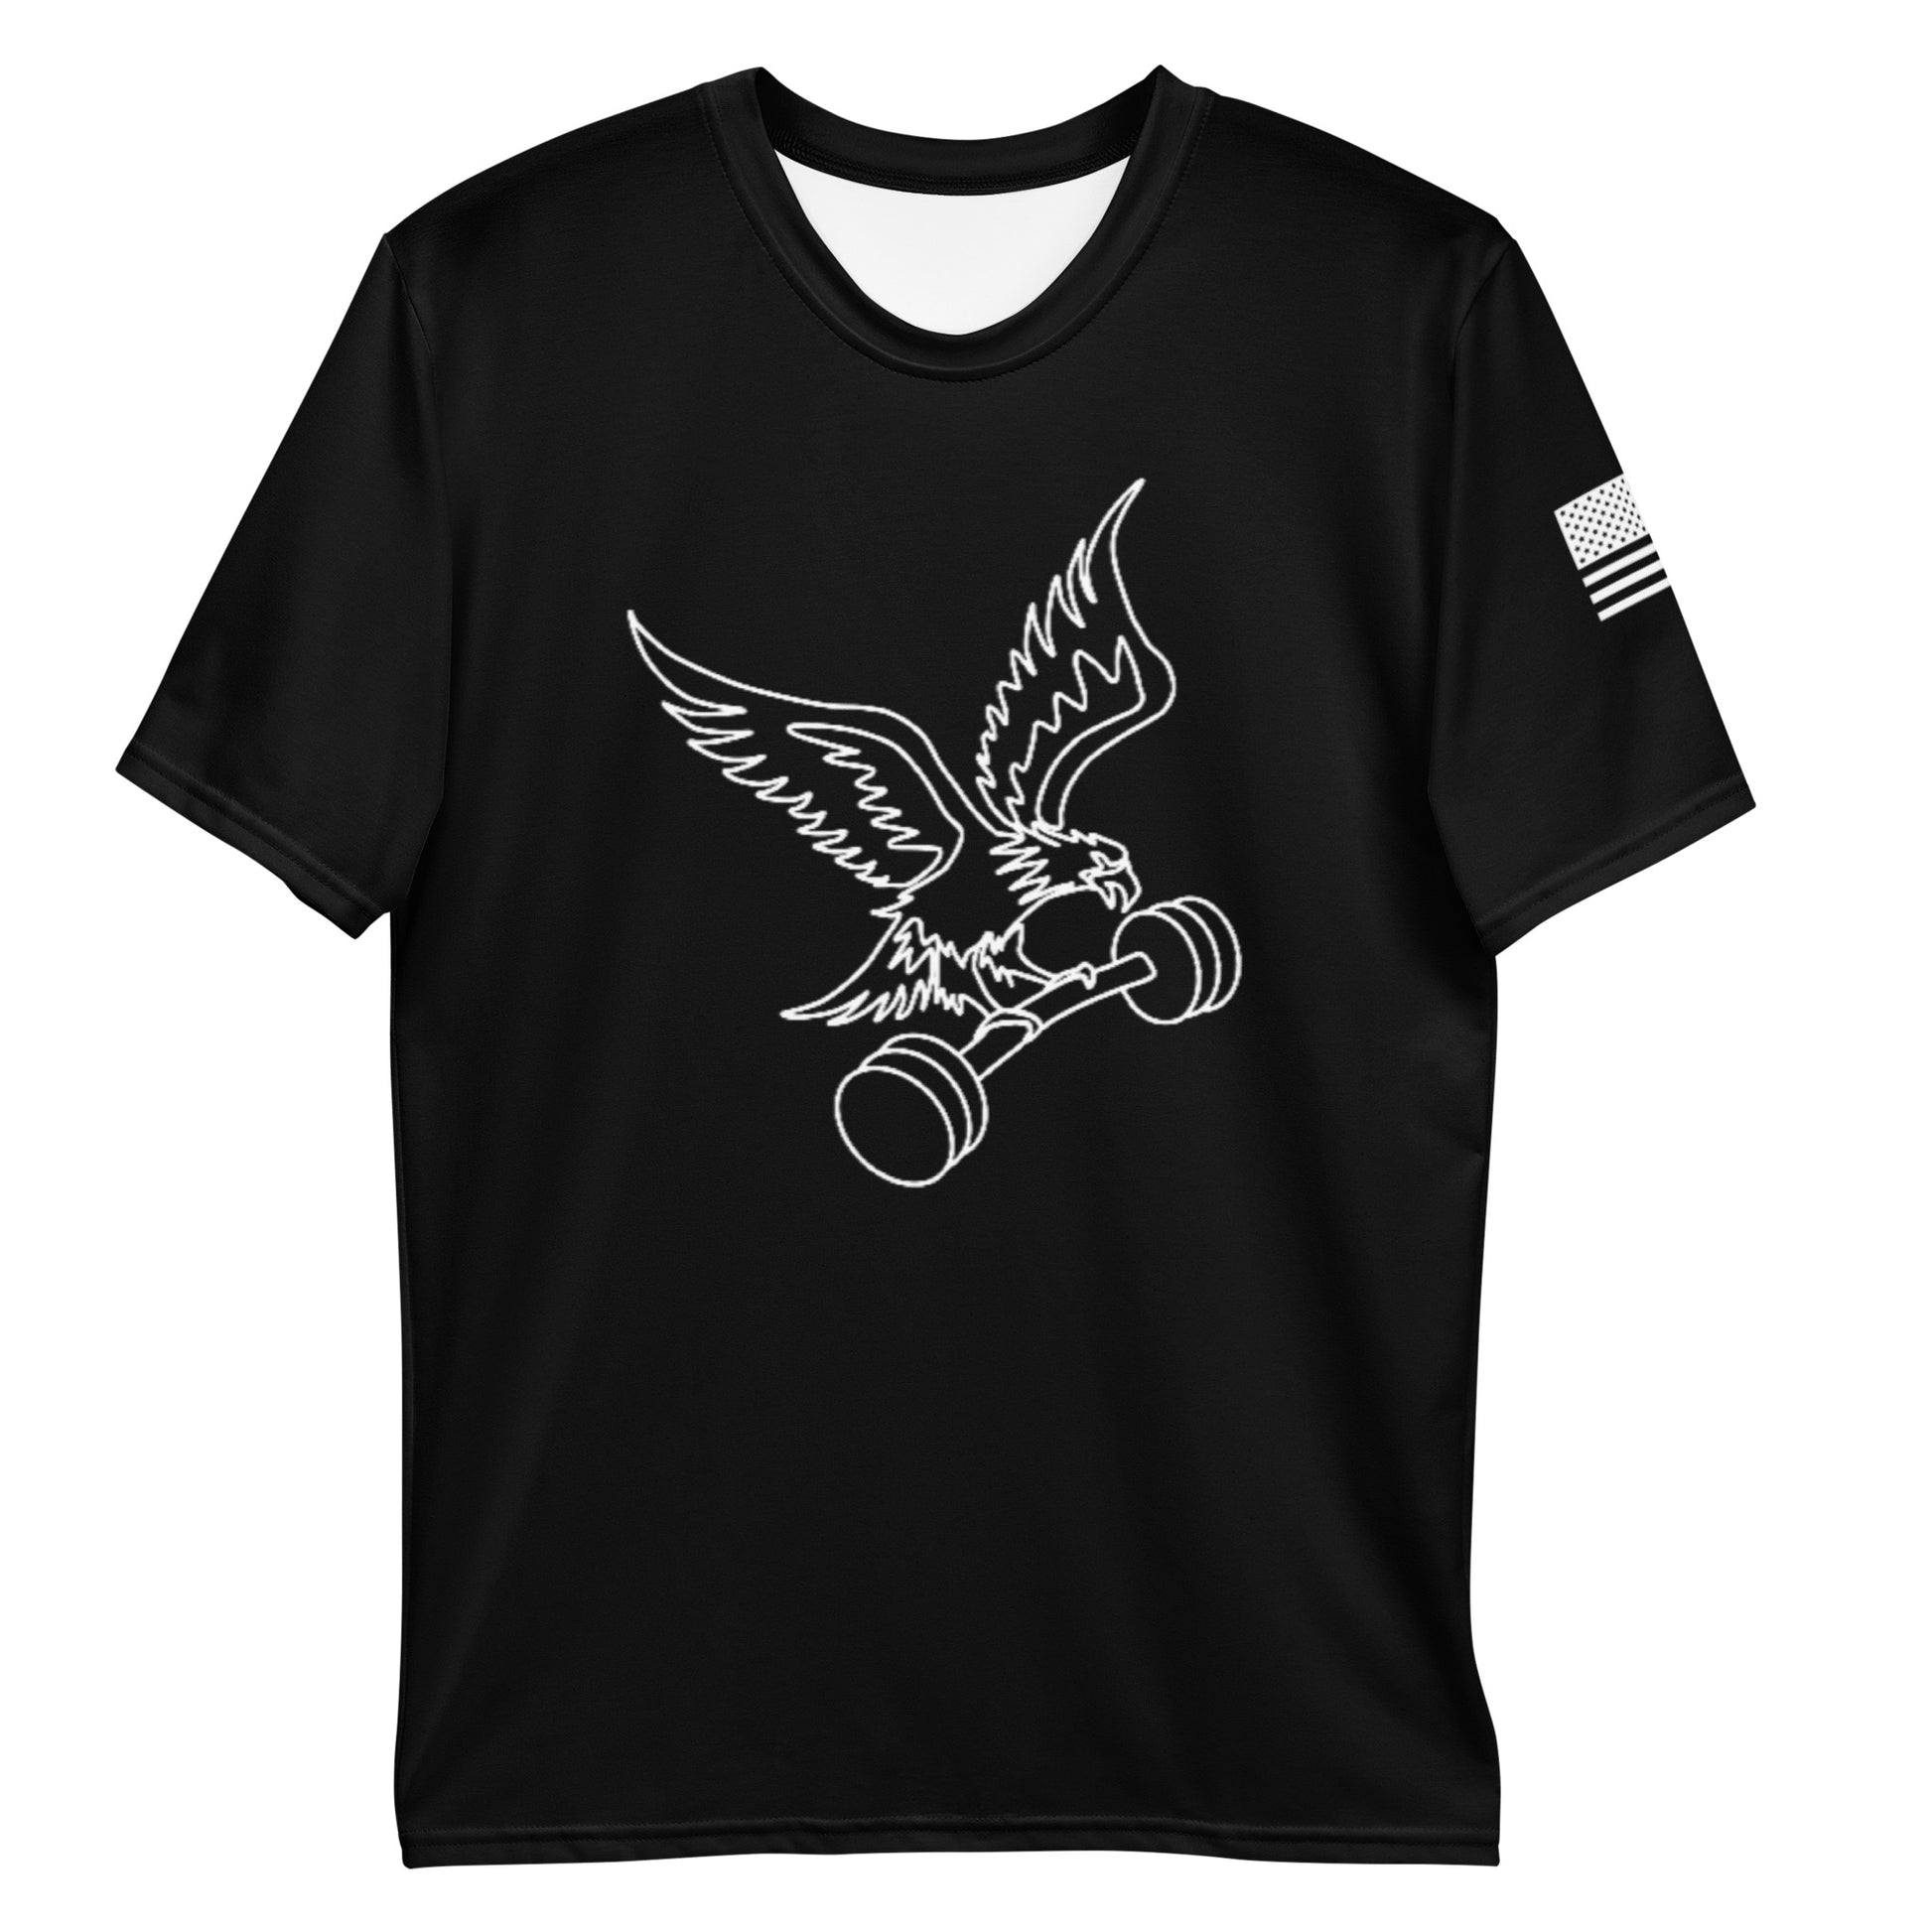 Men's Fitness is Freedom Shirt - Black and White - Front